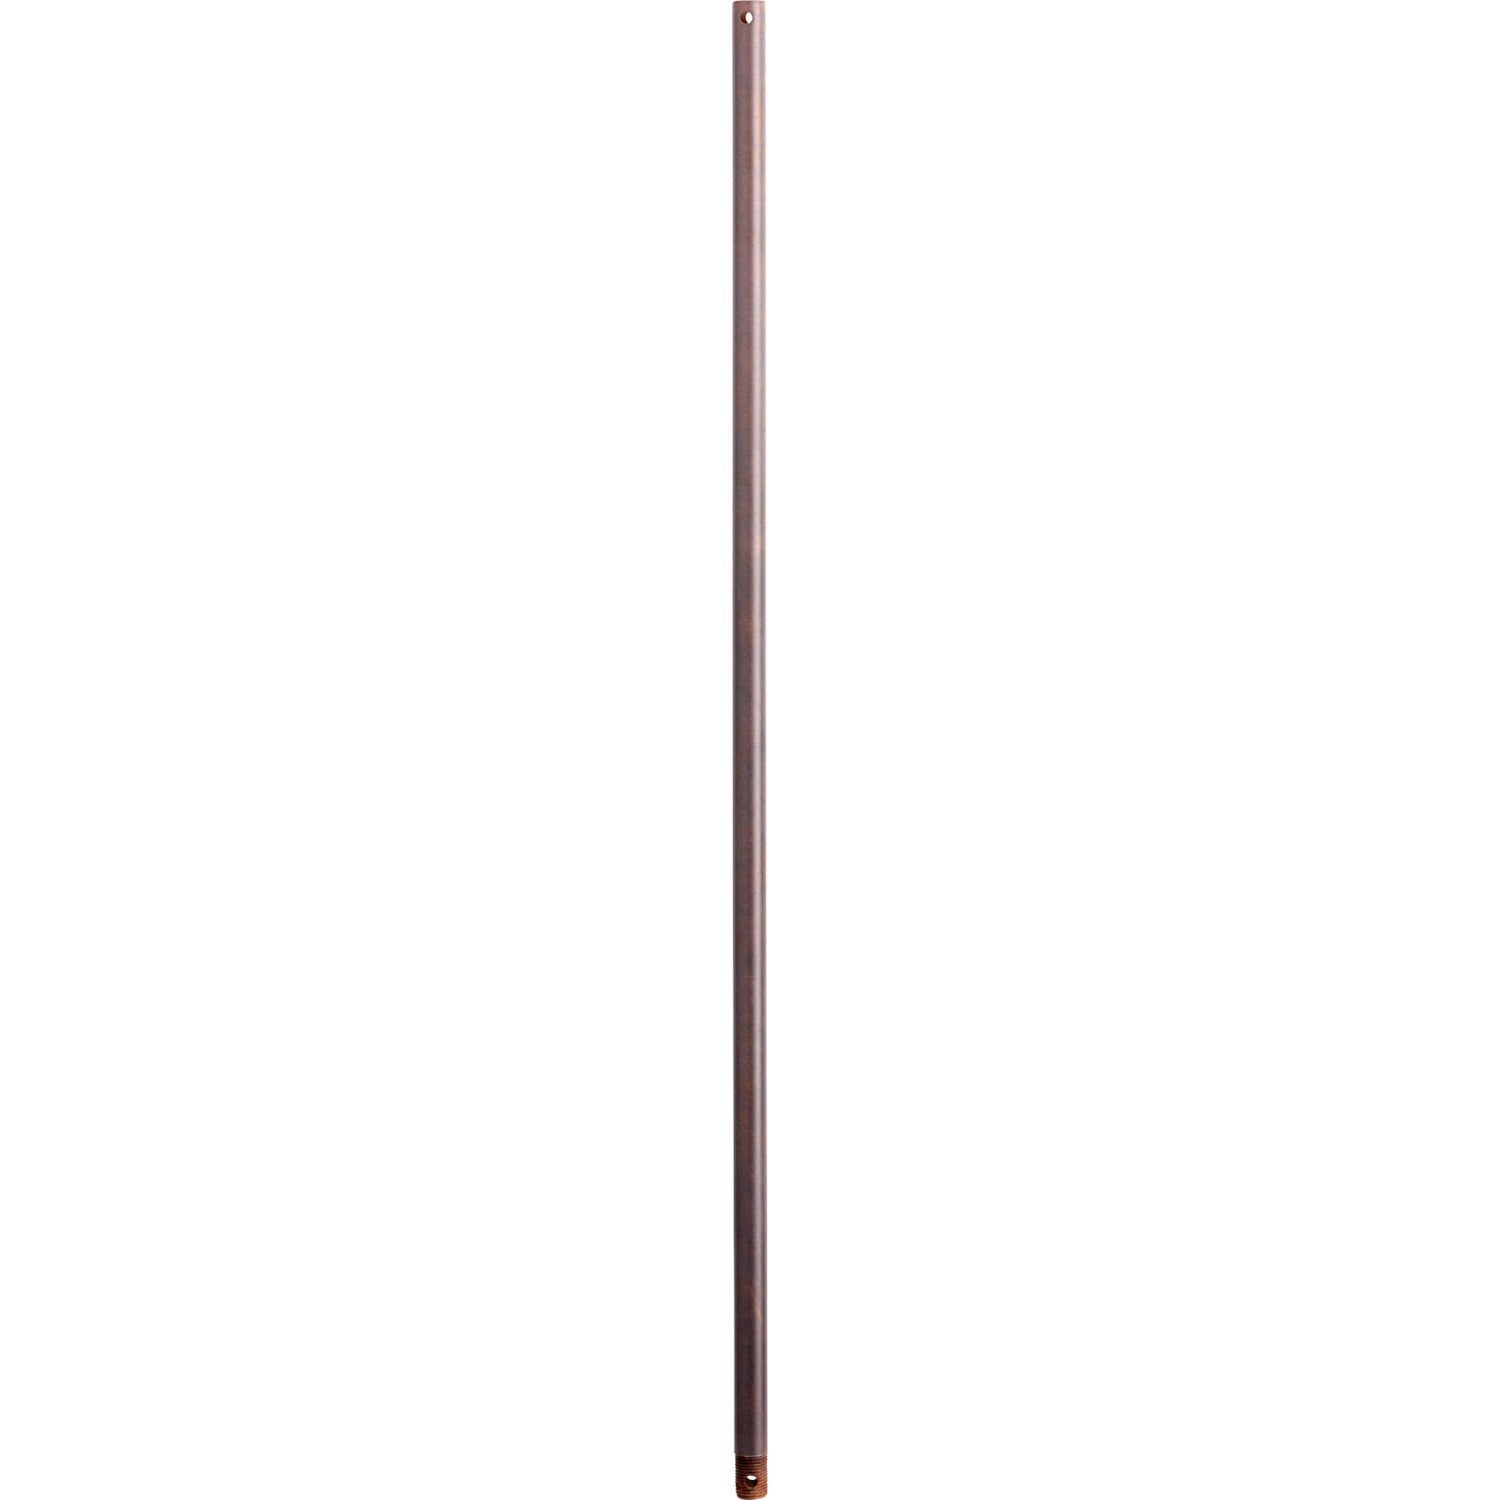 Quorum - 6-3644 - Downrod - 36 in. Downrods - Toasted Sienna